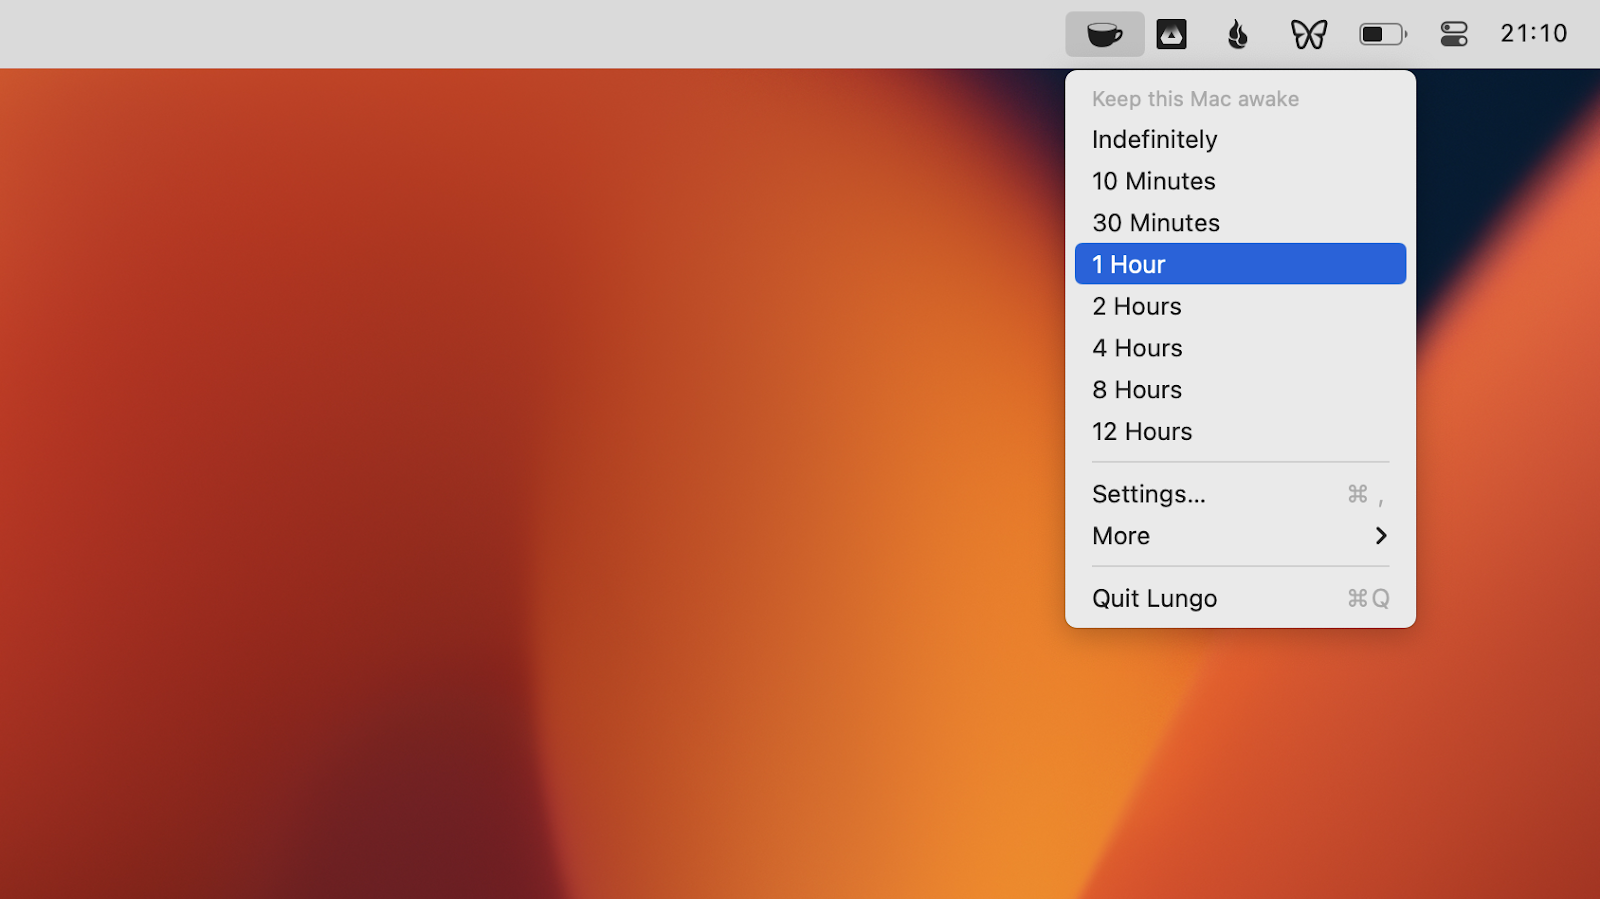 specify how long your Mac needs to stay awake